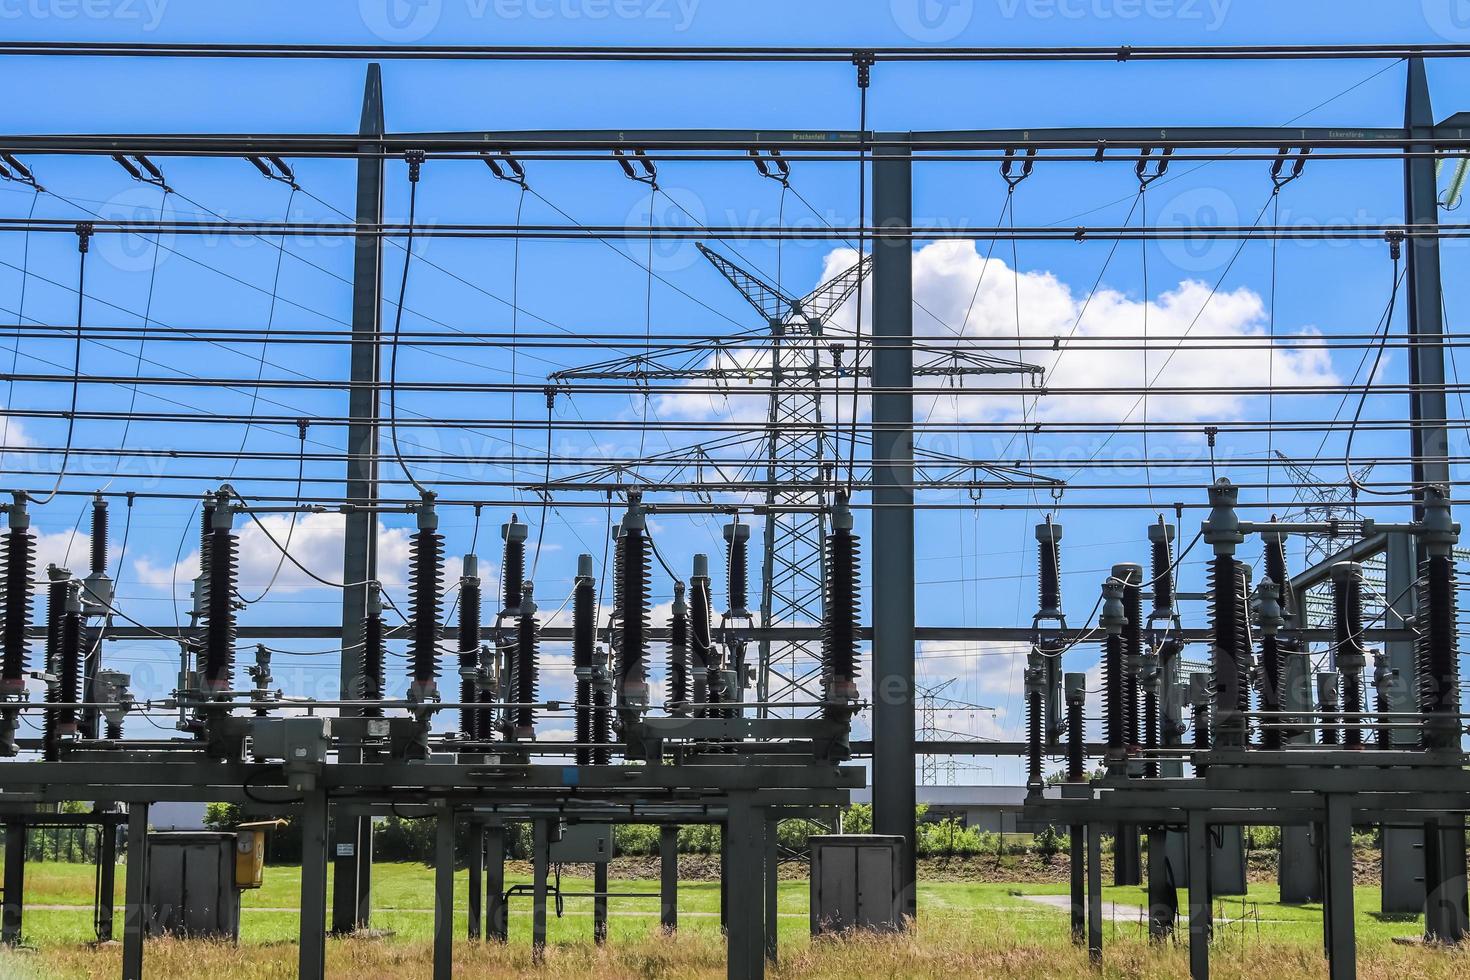 Electrical Transformer. Distribution of electric energy at a big substation with lots power lines on a sunny day photo